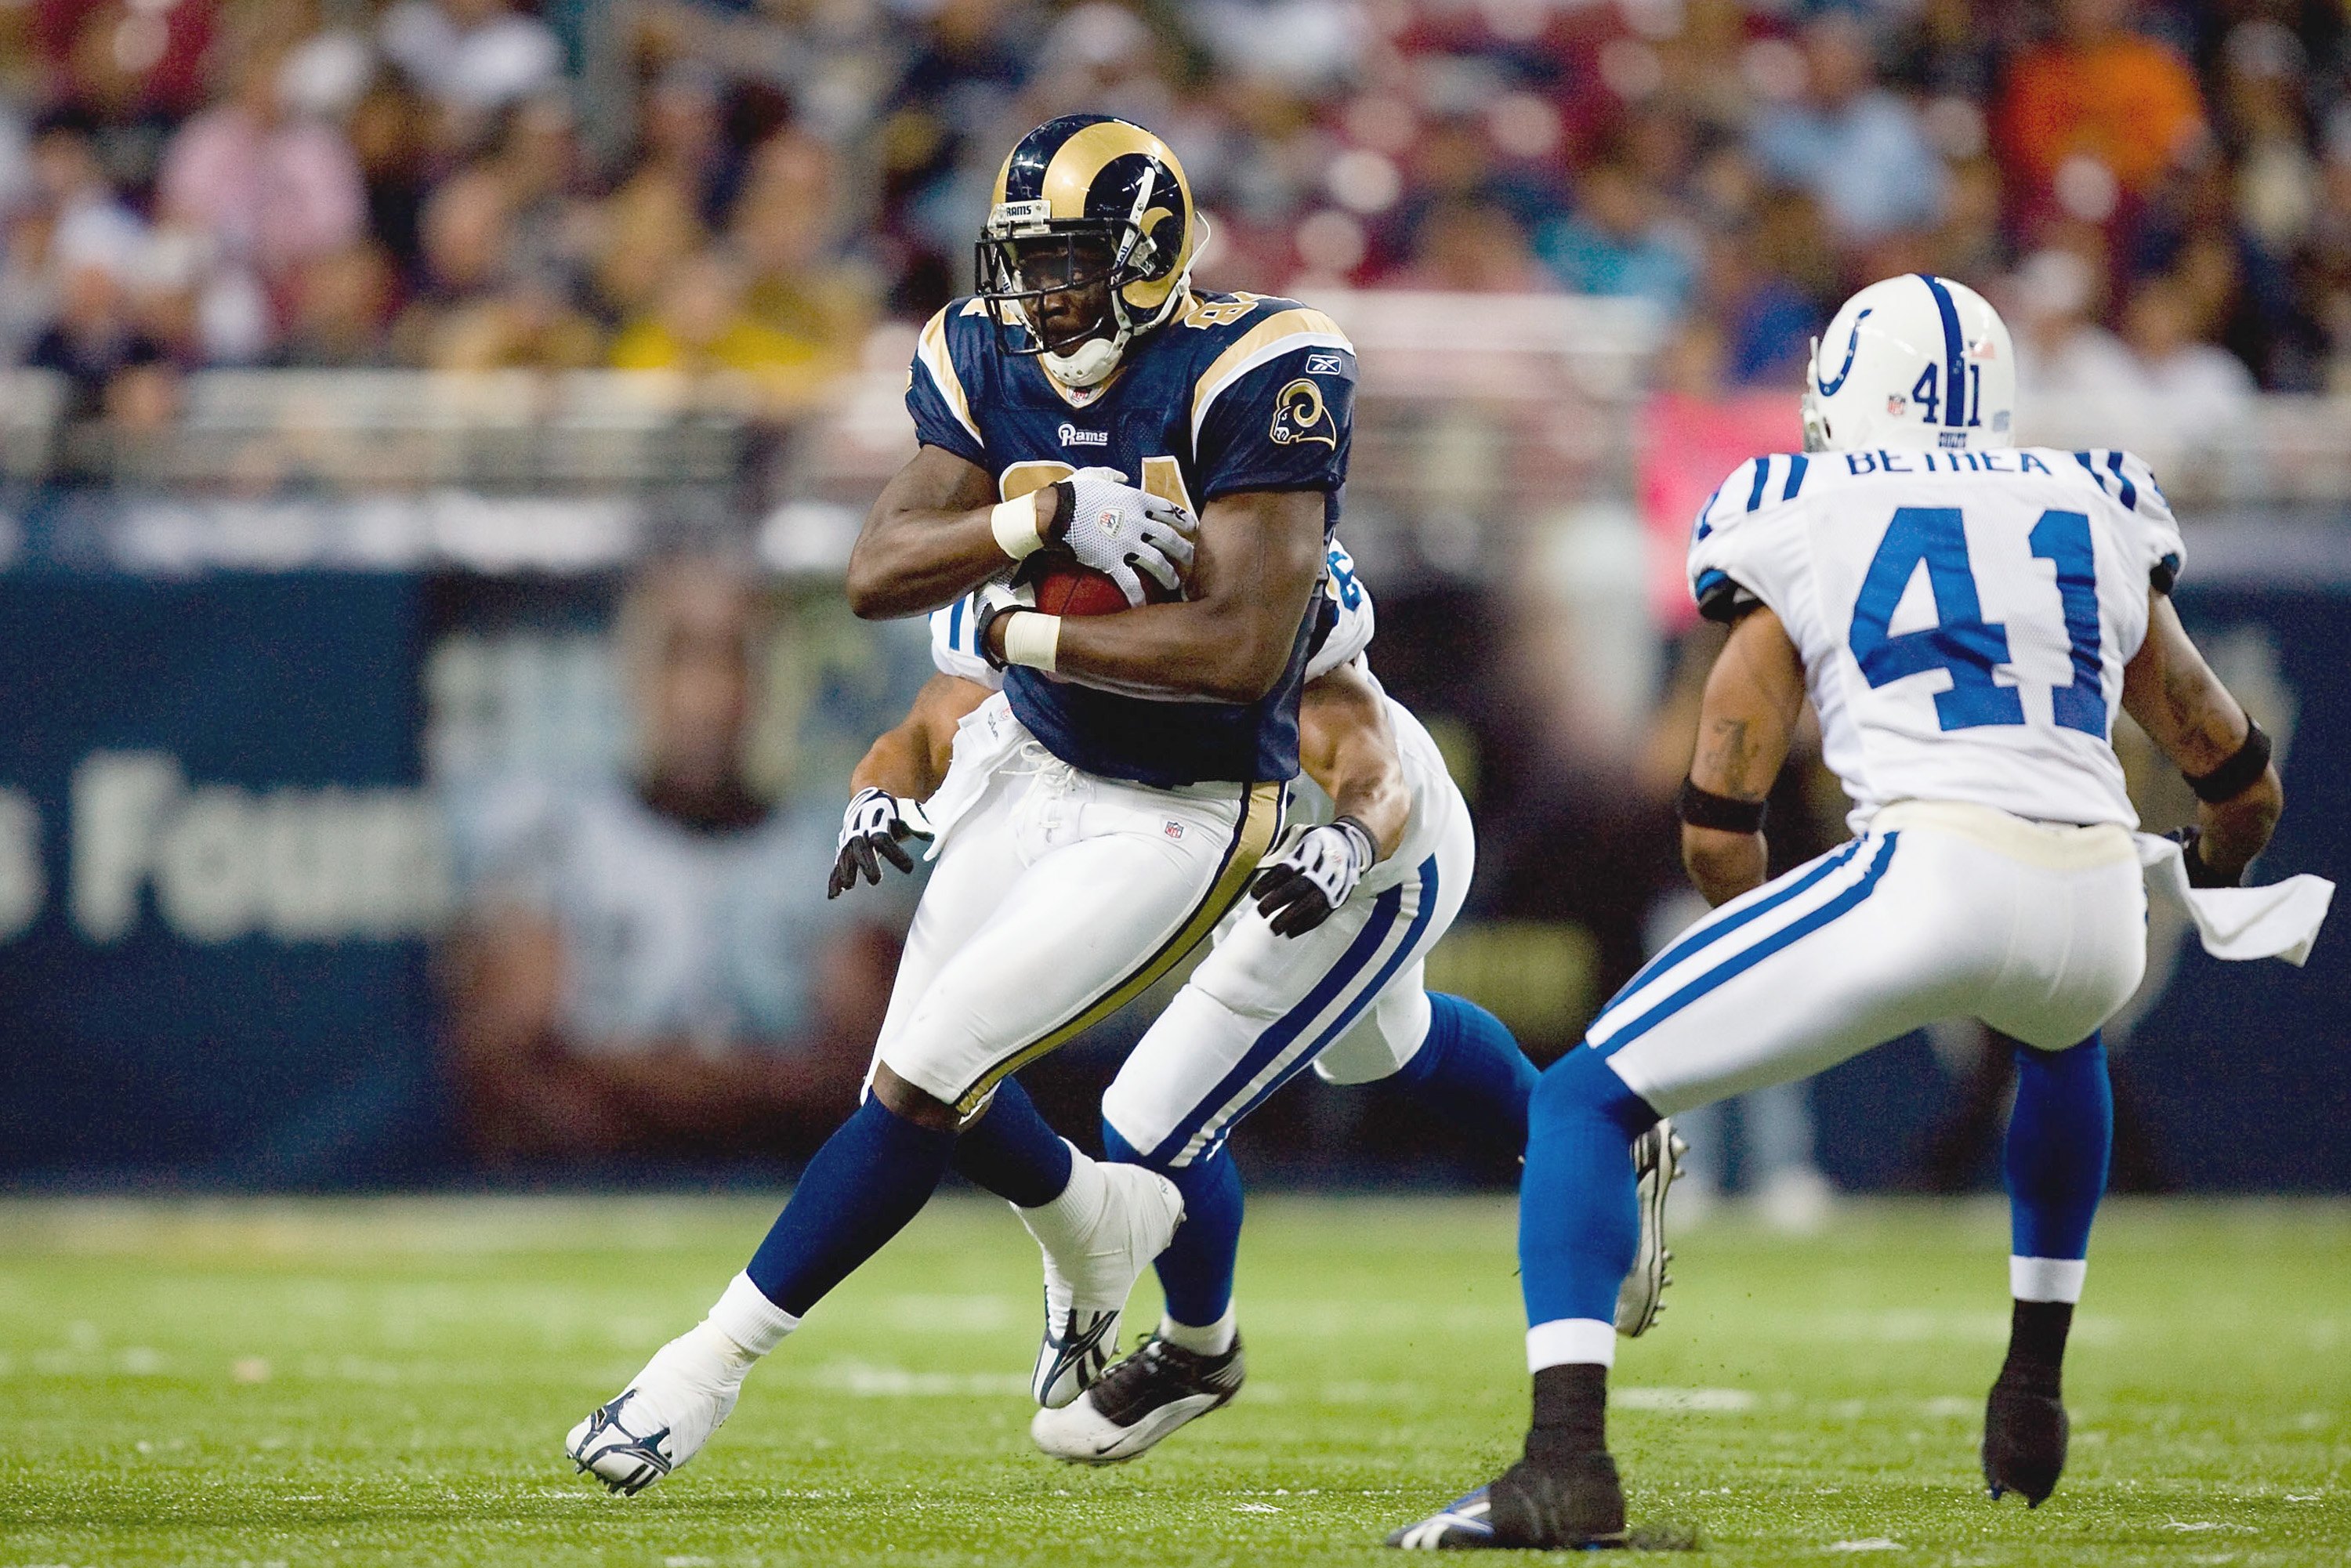 ST. LOUIS, MO - OCTOBER 25: Randy McMichael #84 of the St. Louis Rams carries the ball against the Indianapolis Colts at the Edward Jones Dome on October 25, 2009 in St. Louis, Missouri.  (Photo by Dilip Vishwanat/Getty Images)